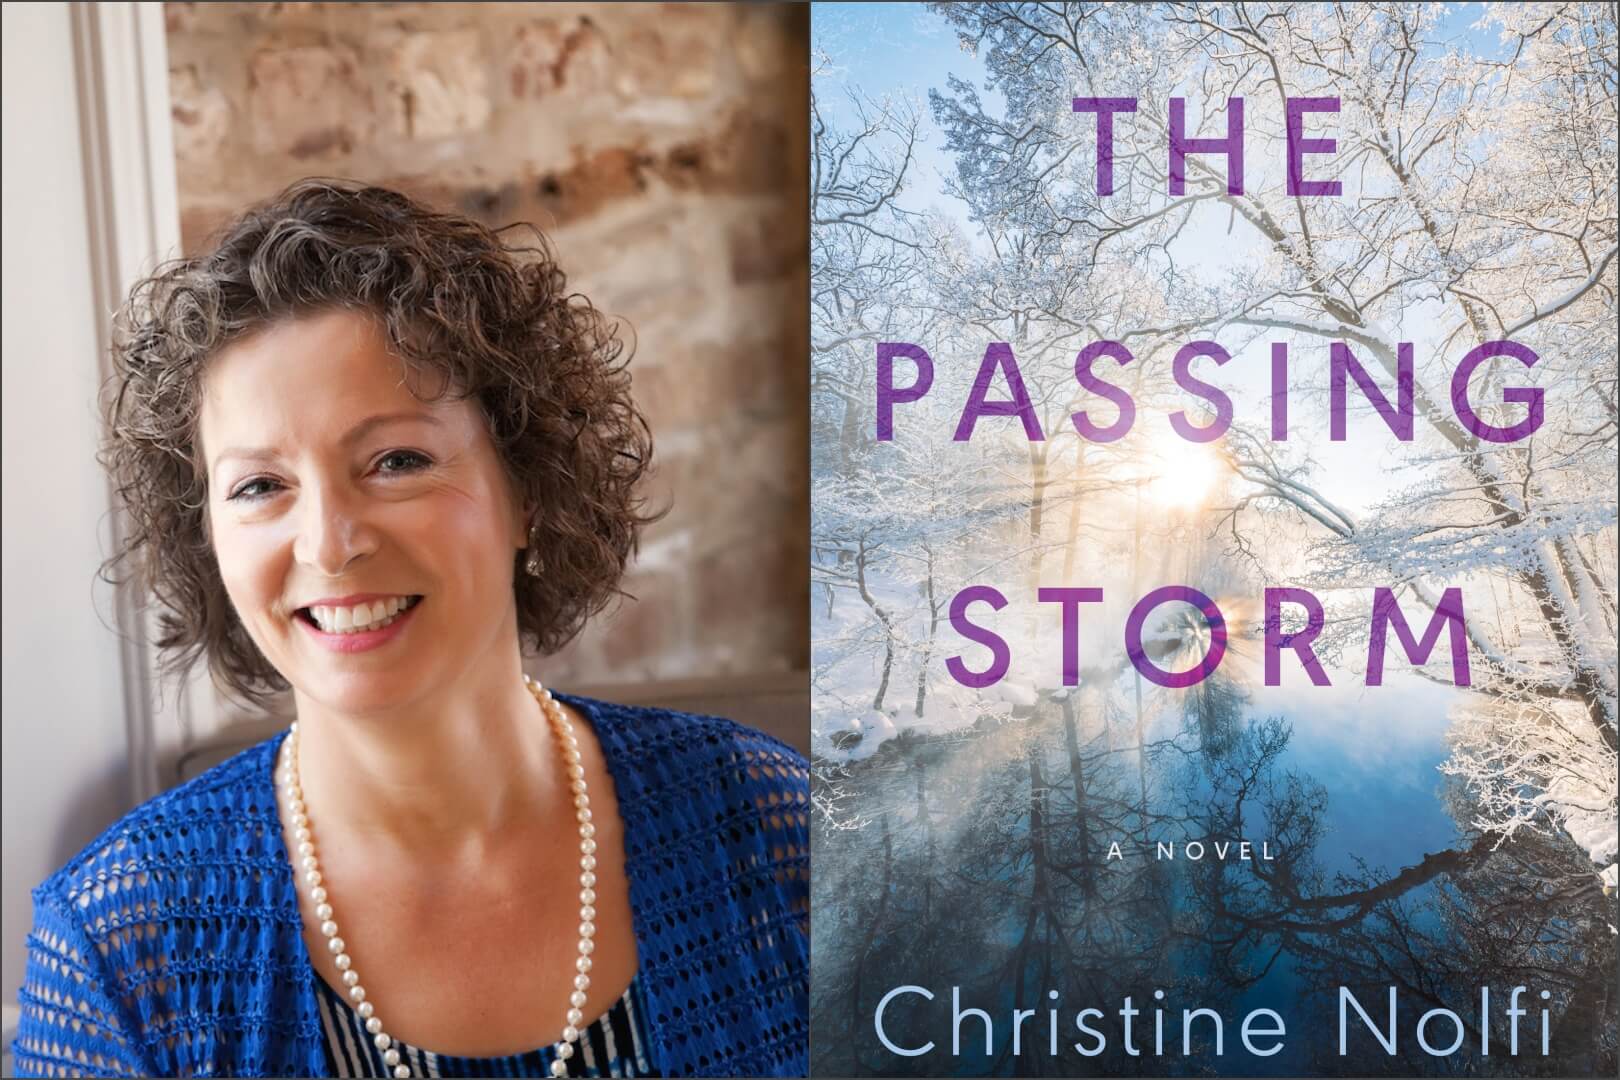 Q&A with Christine Nolfi, Author of The Passing Storm